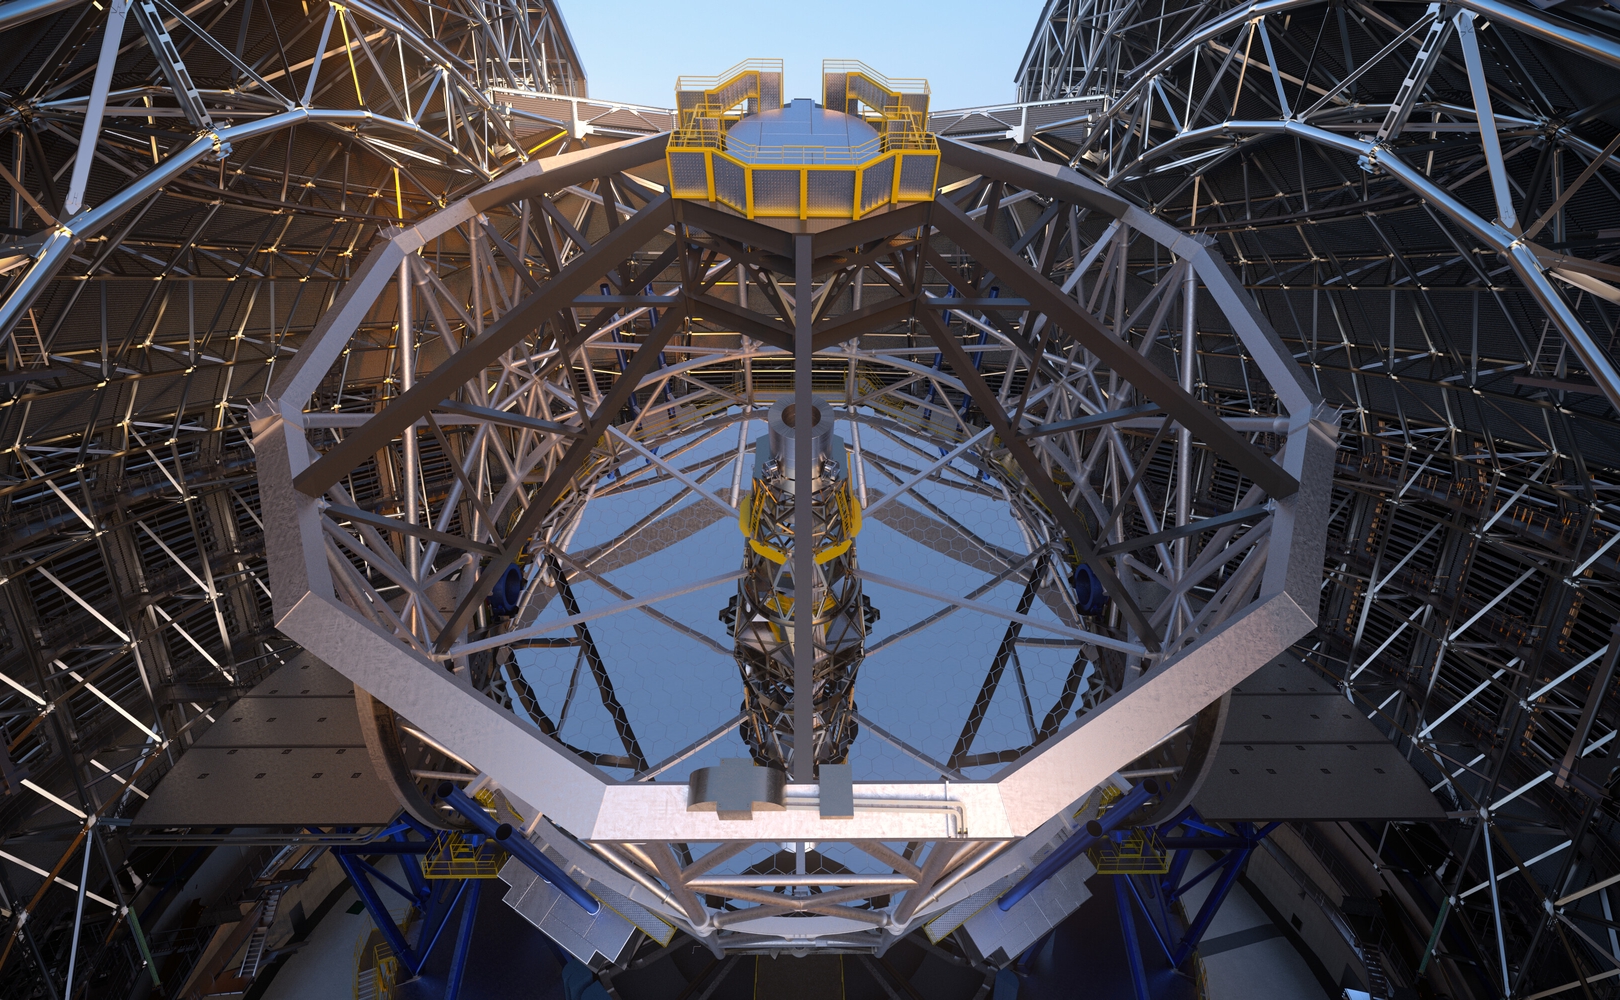 This is how the mirror of the largest telescope in the world is moved